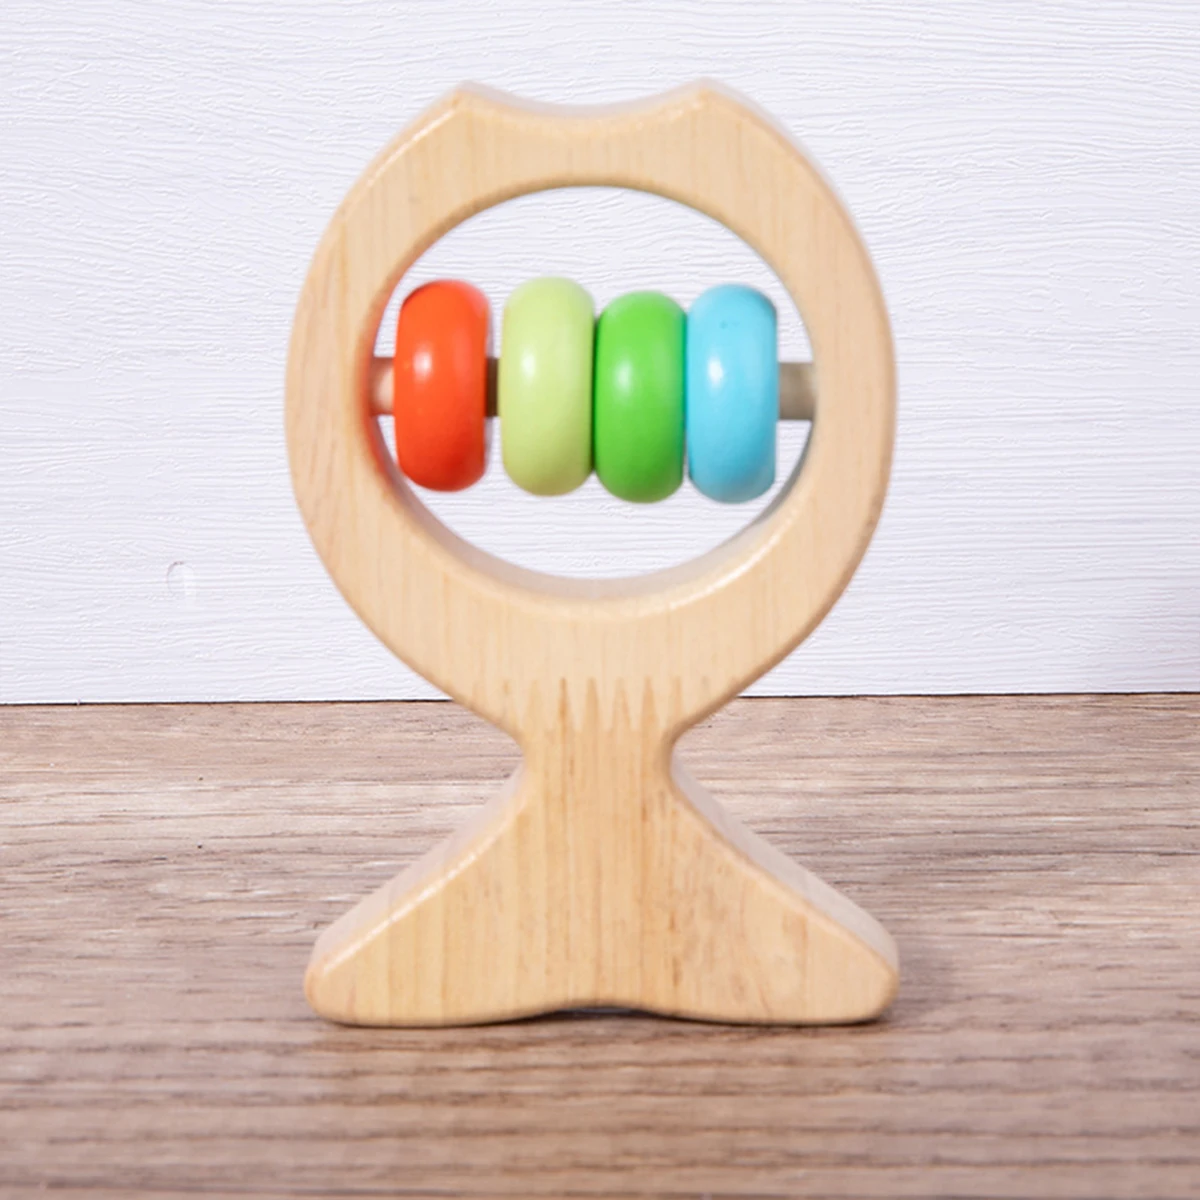 

Montessori Wooden Rattles Colorful Hold Rattle Preschool Educational Handbell Toys Baby Grasping Toy Wood Hand Rattle Soothing